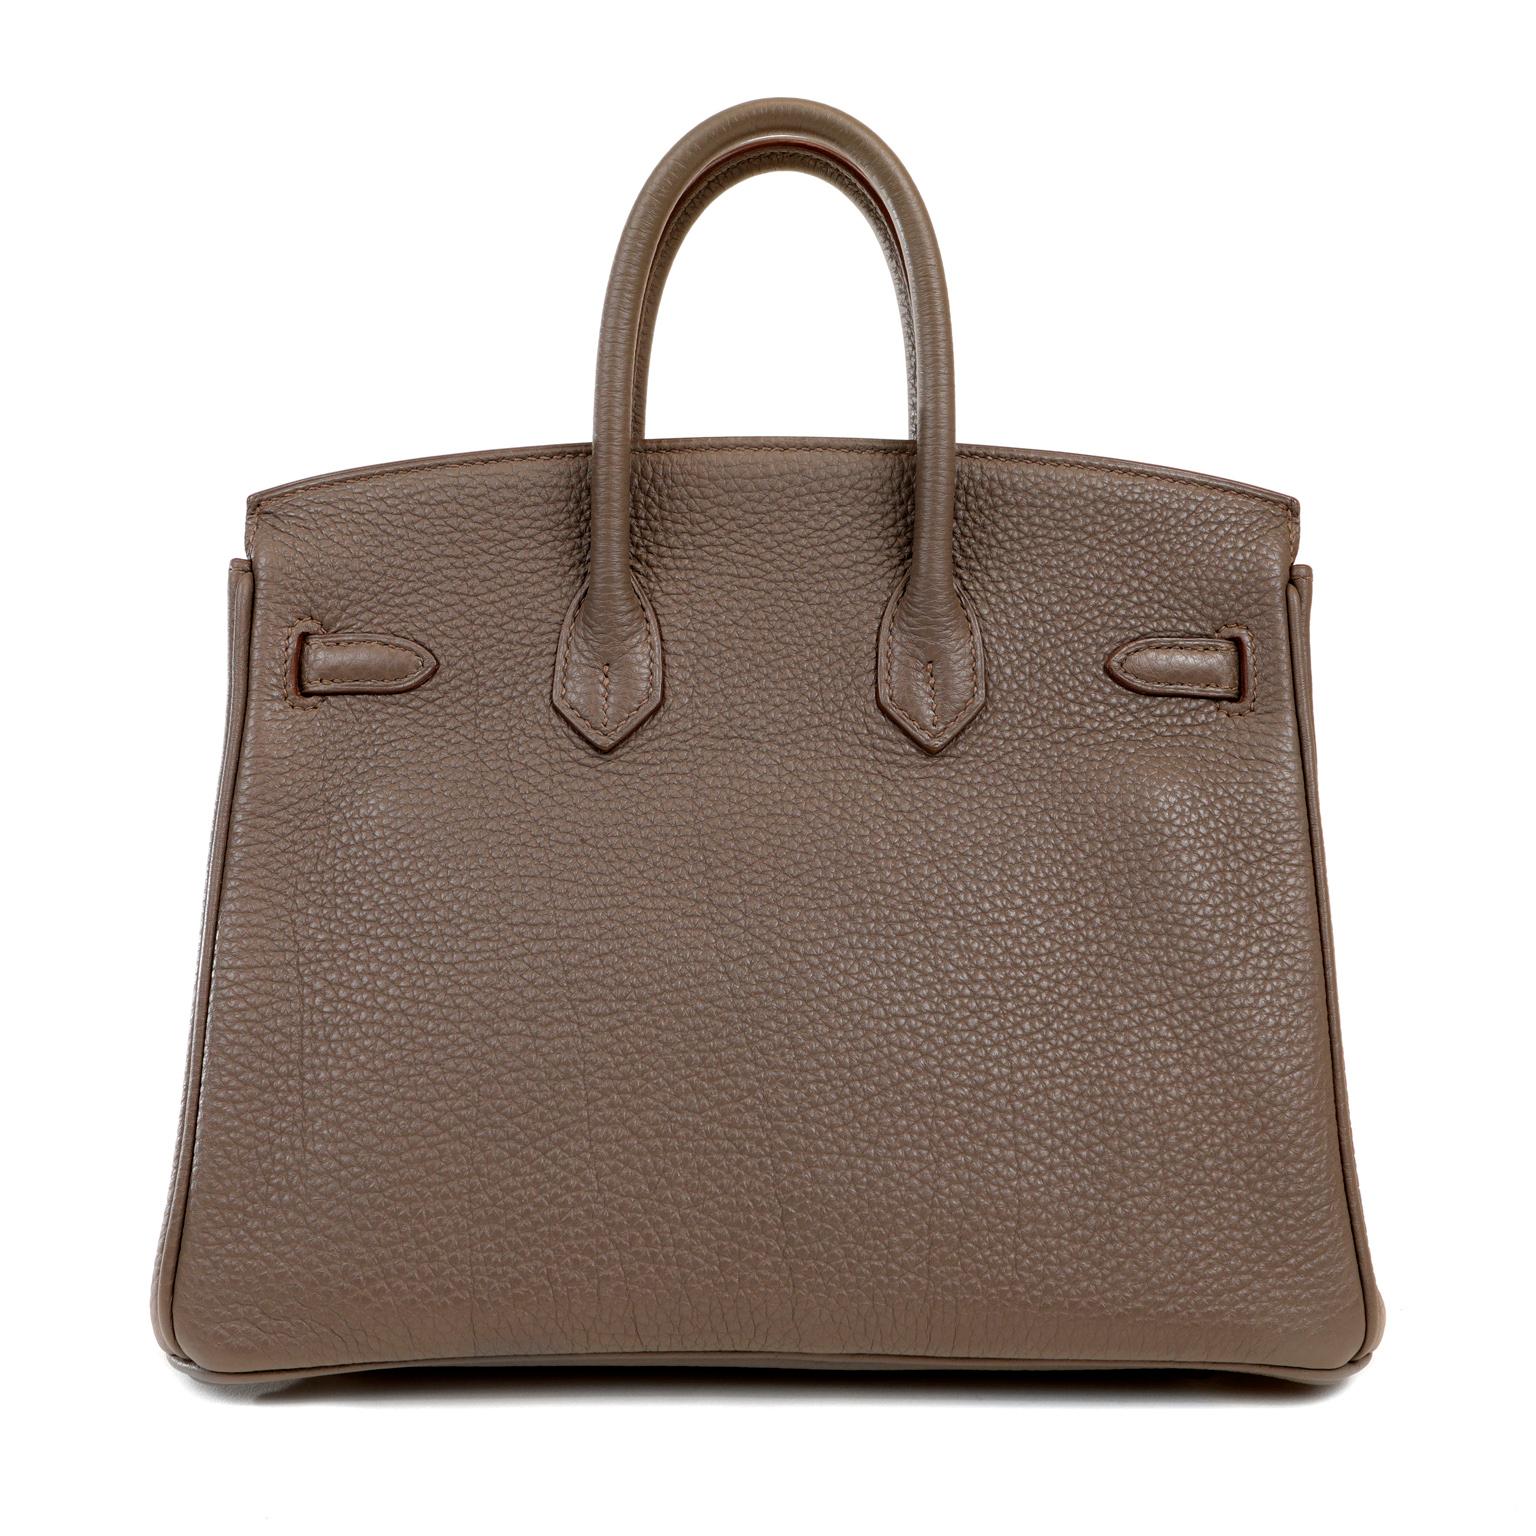 This authentic Hermès Matte Grey Togo 25 cm Birkin is in pristine condition with the protective plastic on much of the hardware.    Hand stitched by skilled craftsmen, wait lists of a year or more are common for the Hermès Birkin. They are